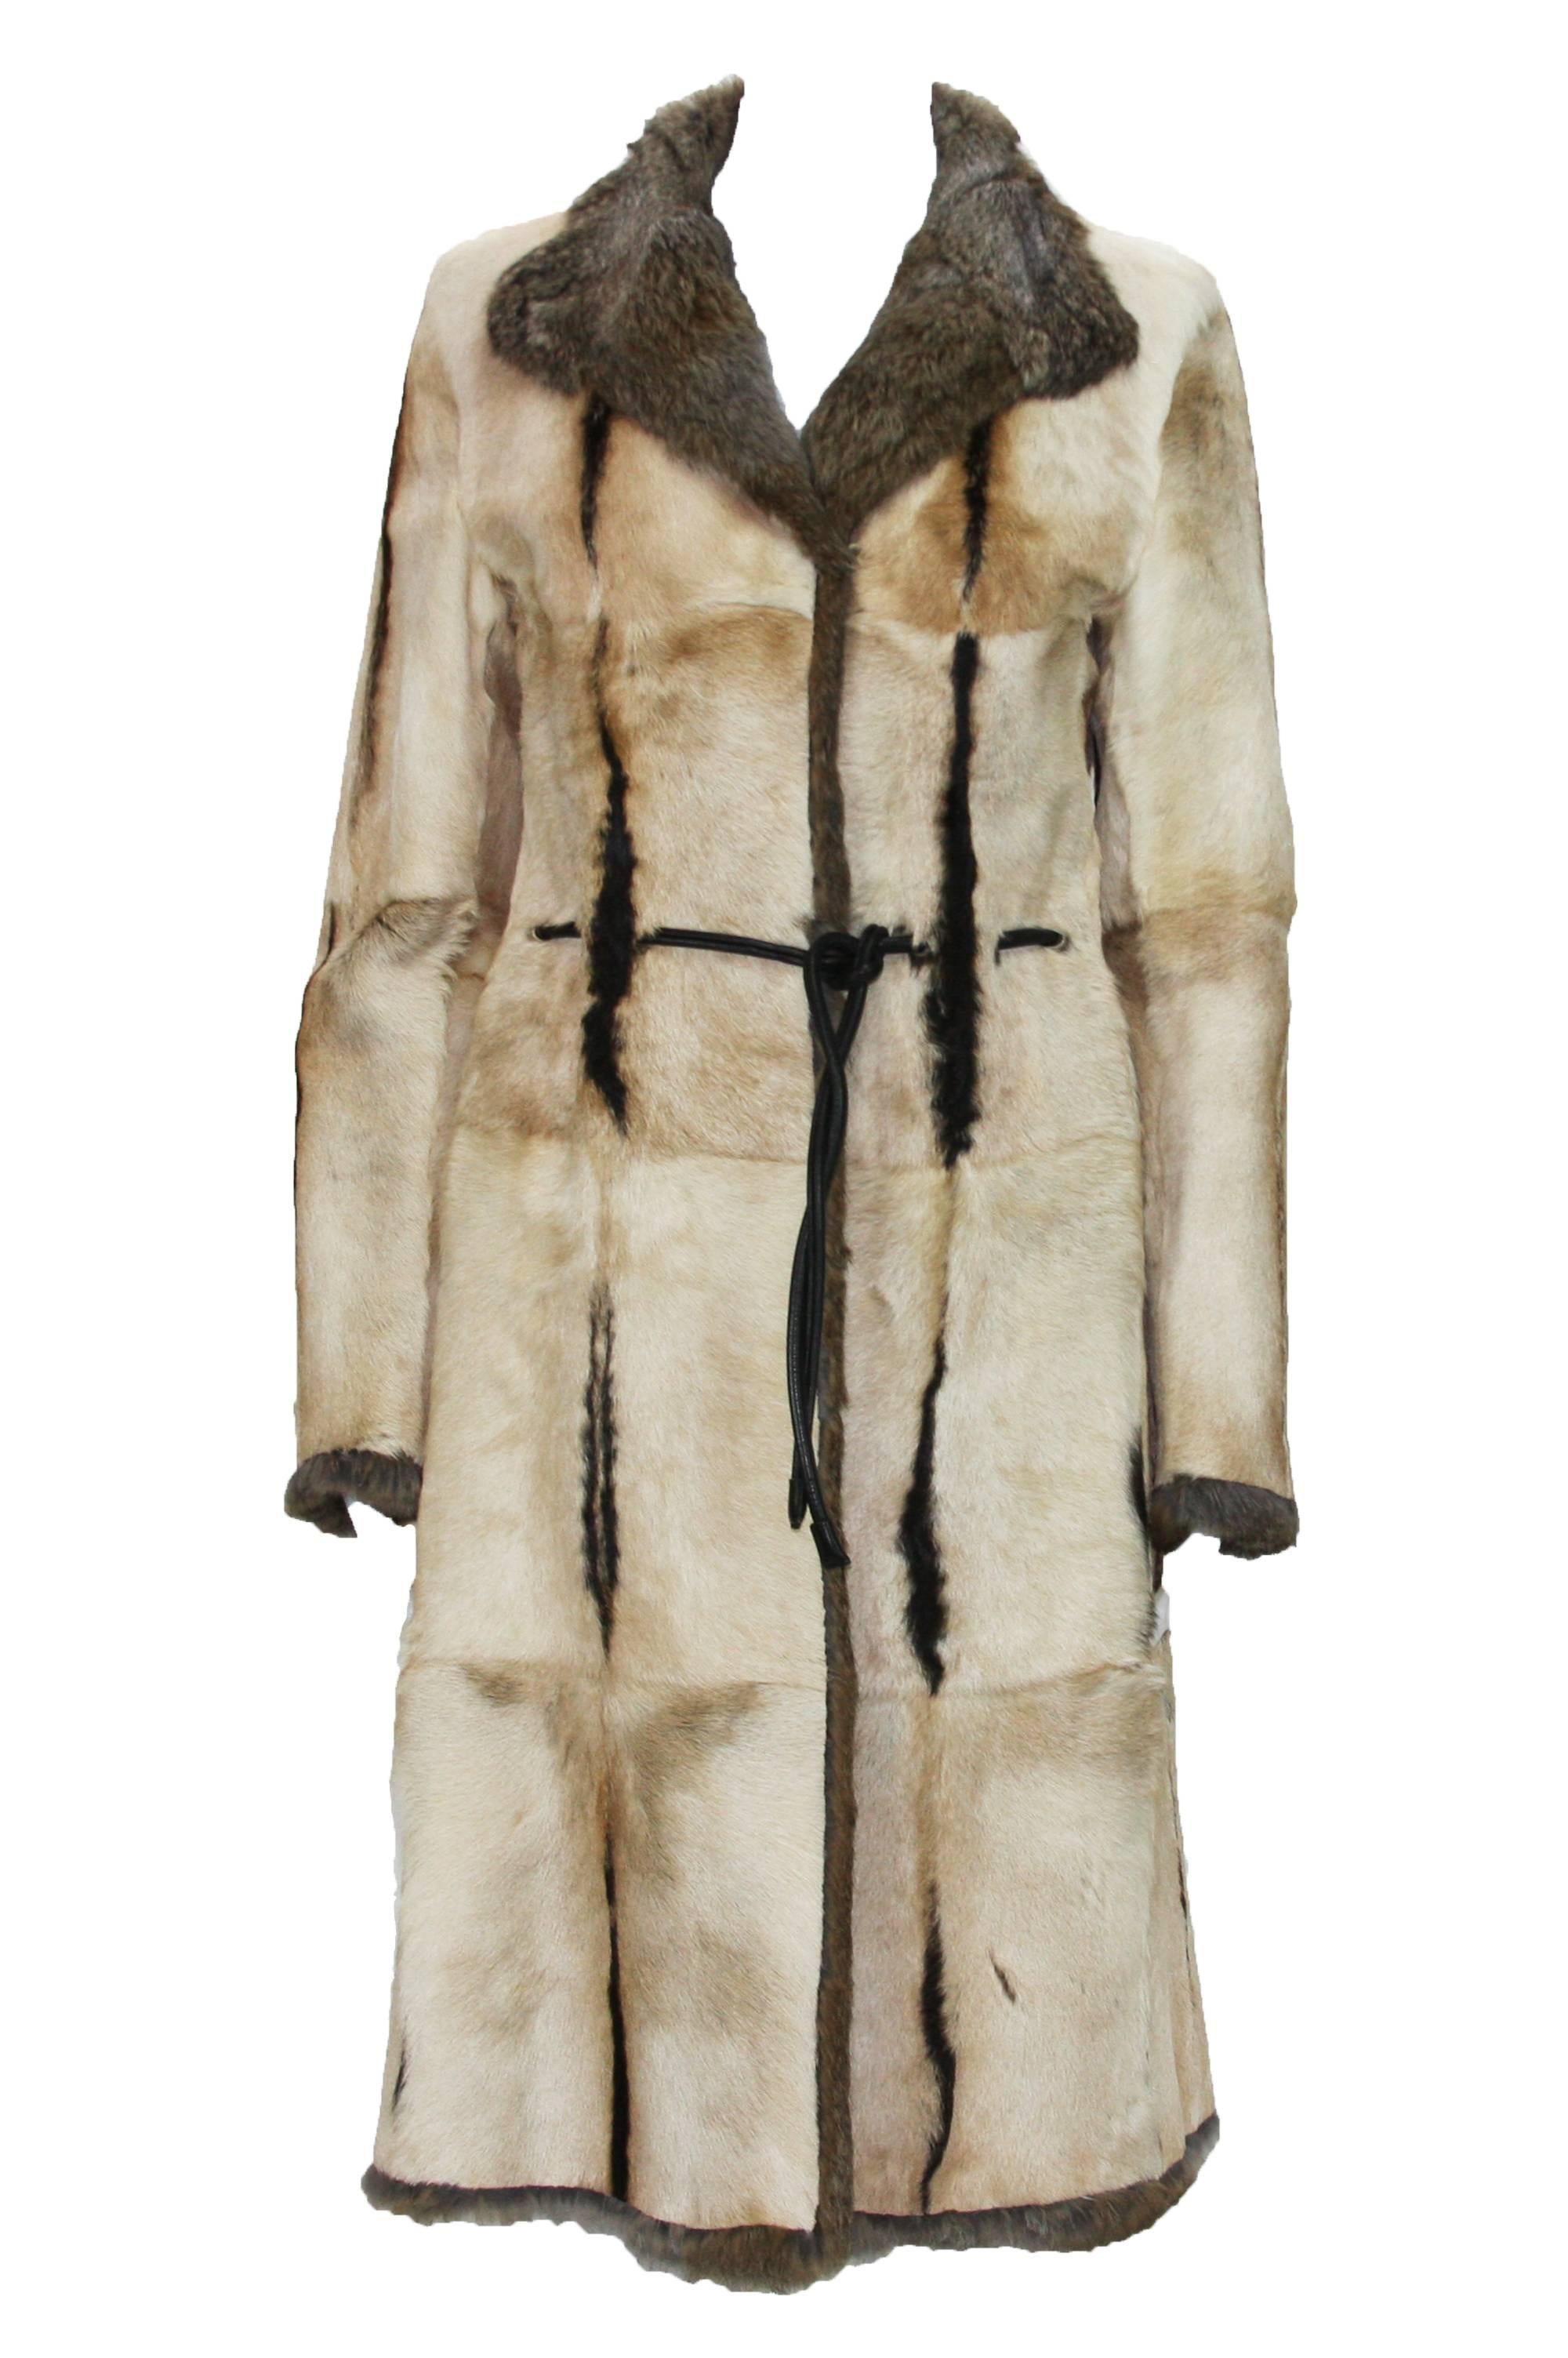 Tom Ford for Gucci Reversible Fur Coat.
1999 Collection.
 Beige color calf hair reverse to brown/gray color rabbit fur.
 Slit pockets at sides.
 Black leather tie at waist. 

Size 38

Measurements flat: length - 42 inches, shoulder - 17